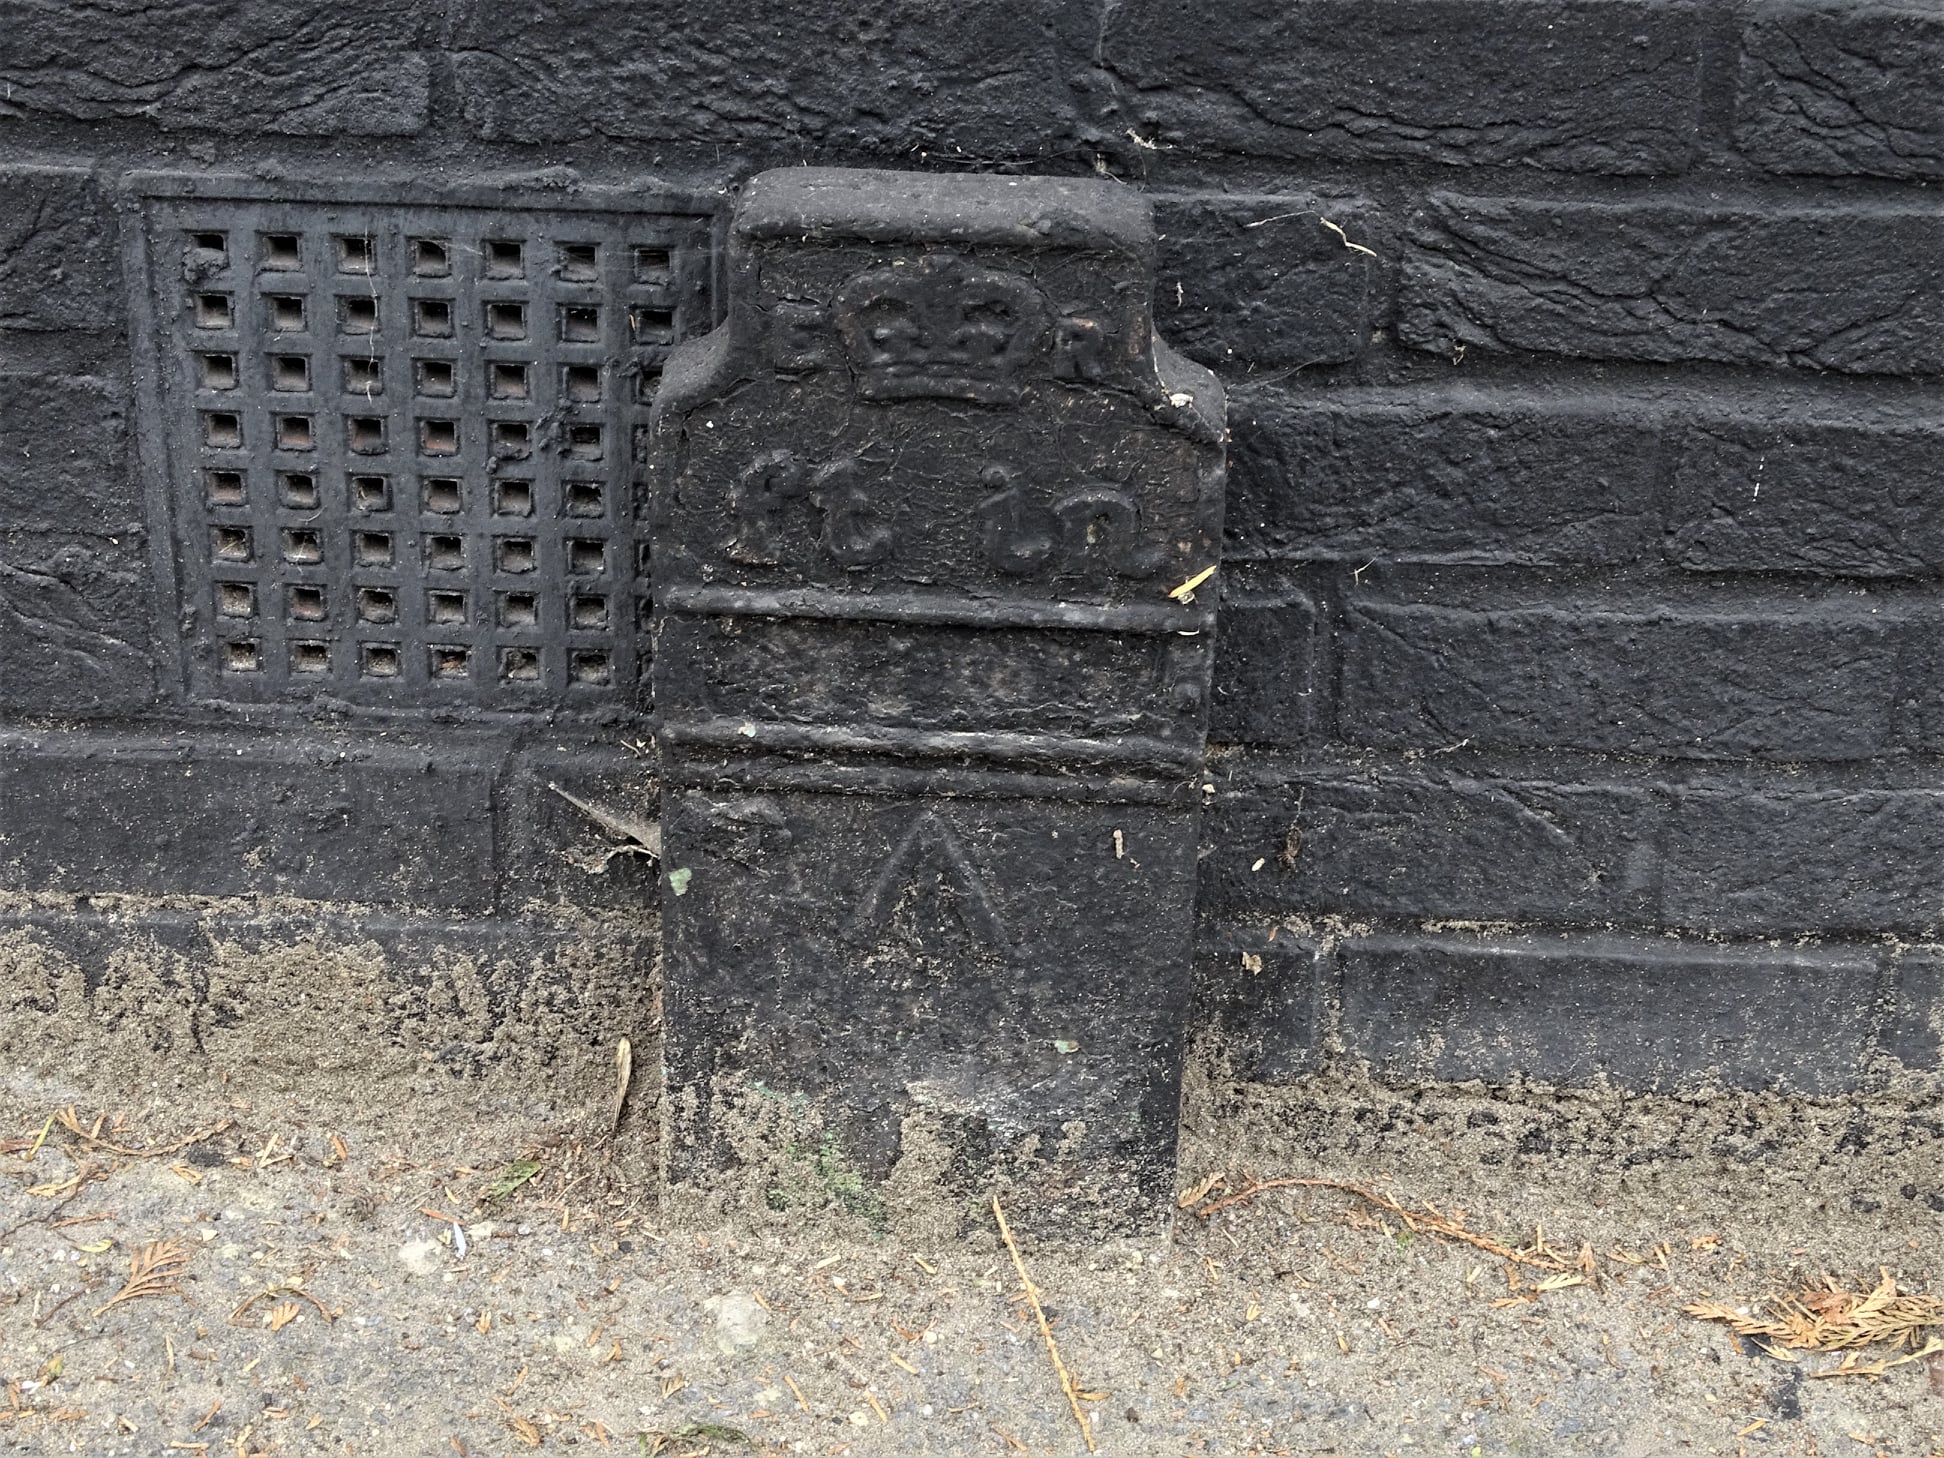 Telegraph cable marker post at 15 Sparrows Herne, Bushey, Herts by Stephen Danzig 